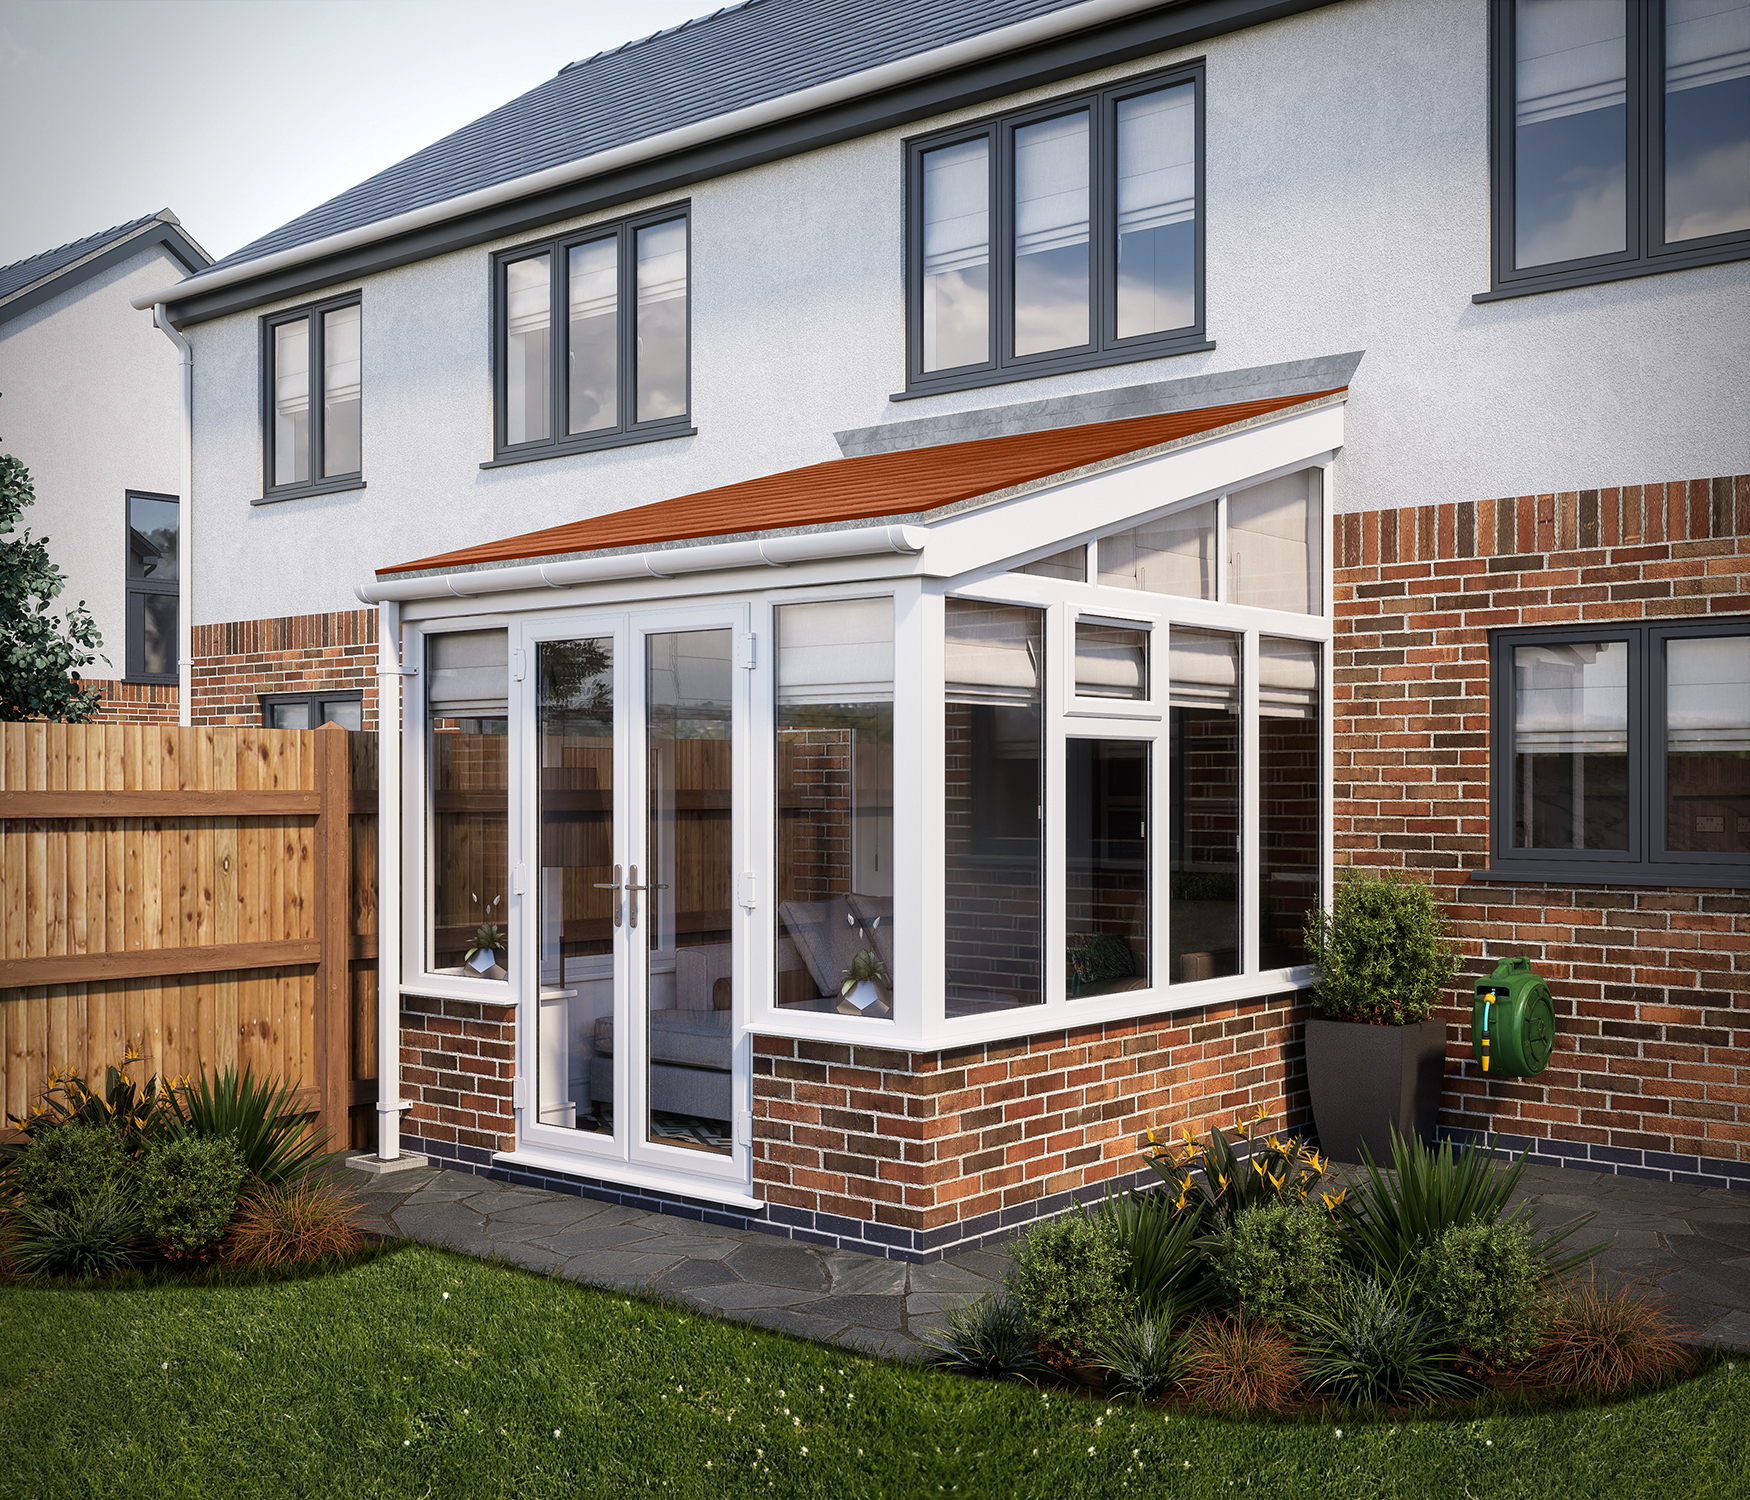 Image of SOLid Roof Lean to Conservatory White Frames Dwarf Wall with Rustic Terracotta Tiles - 10 x 10ft